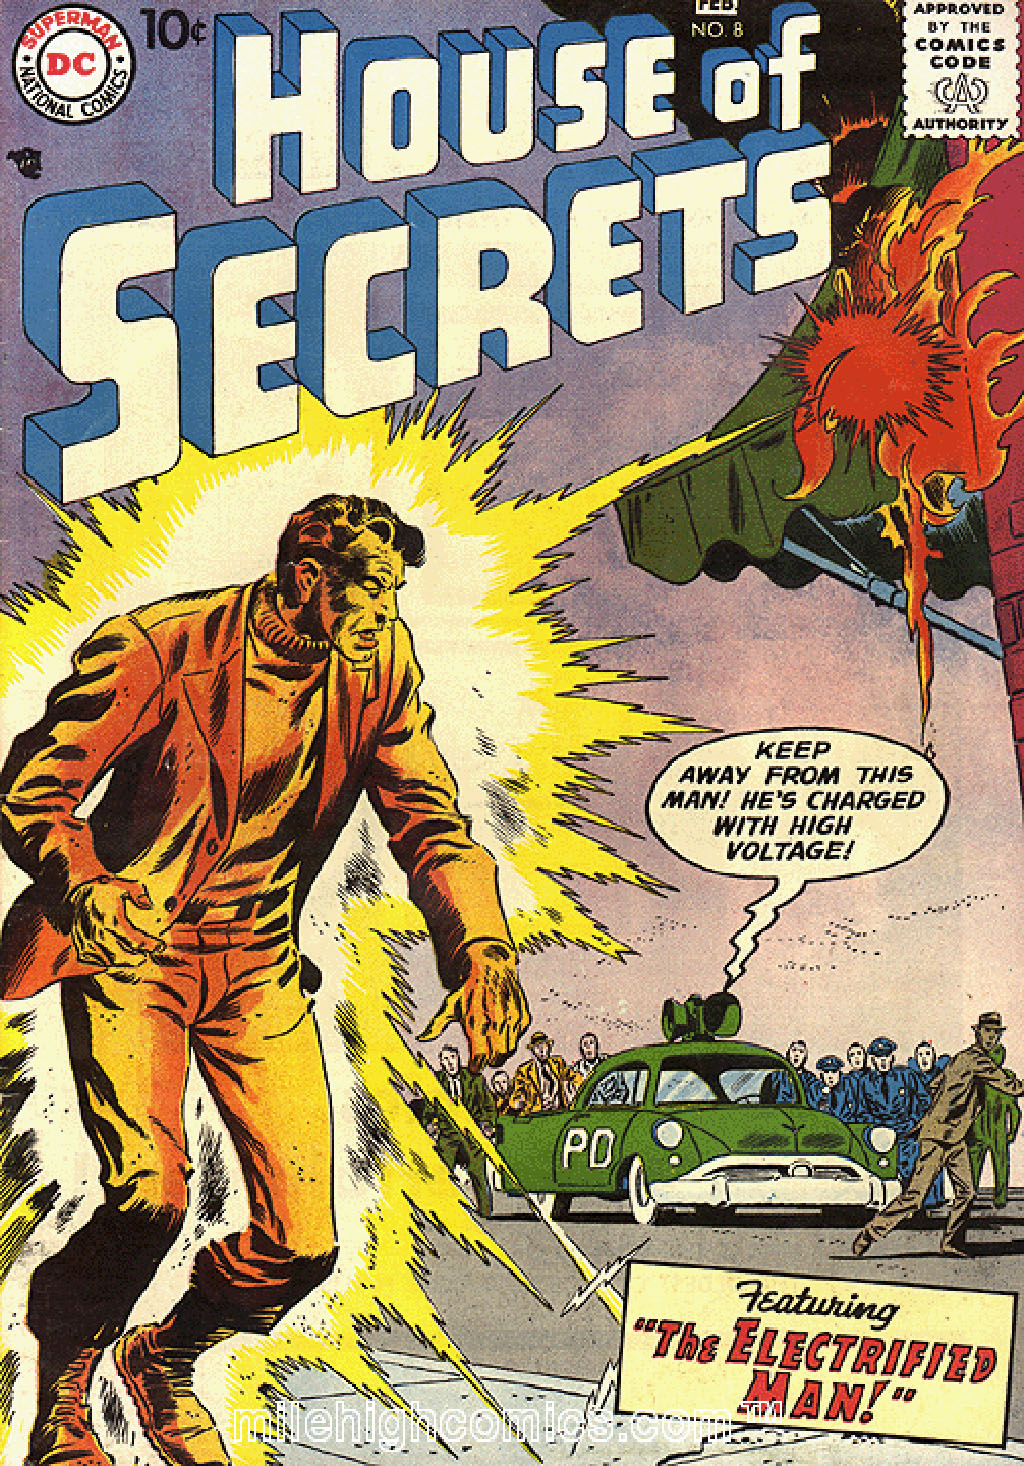 House of Secrets (1956) issue 8 - Page 1